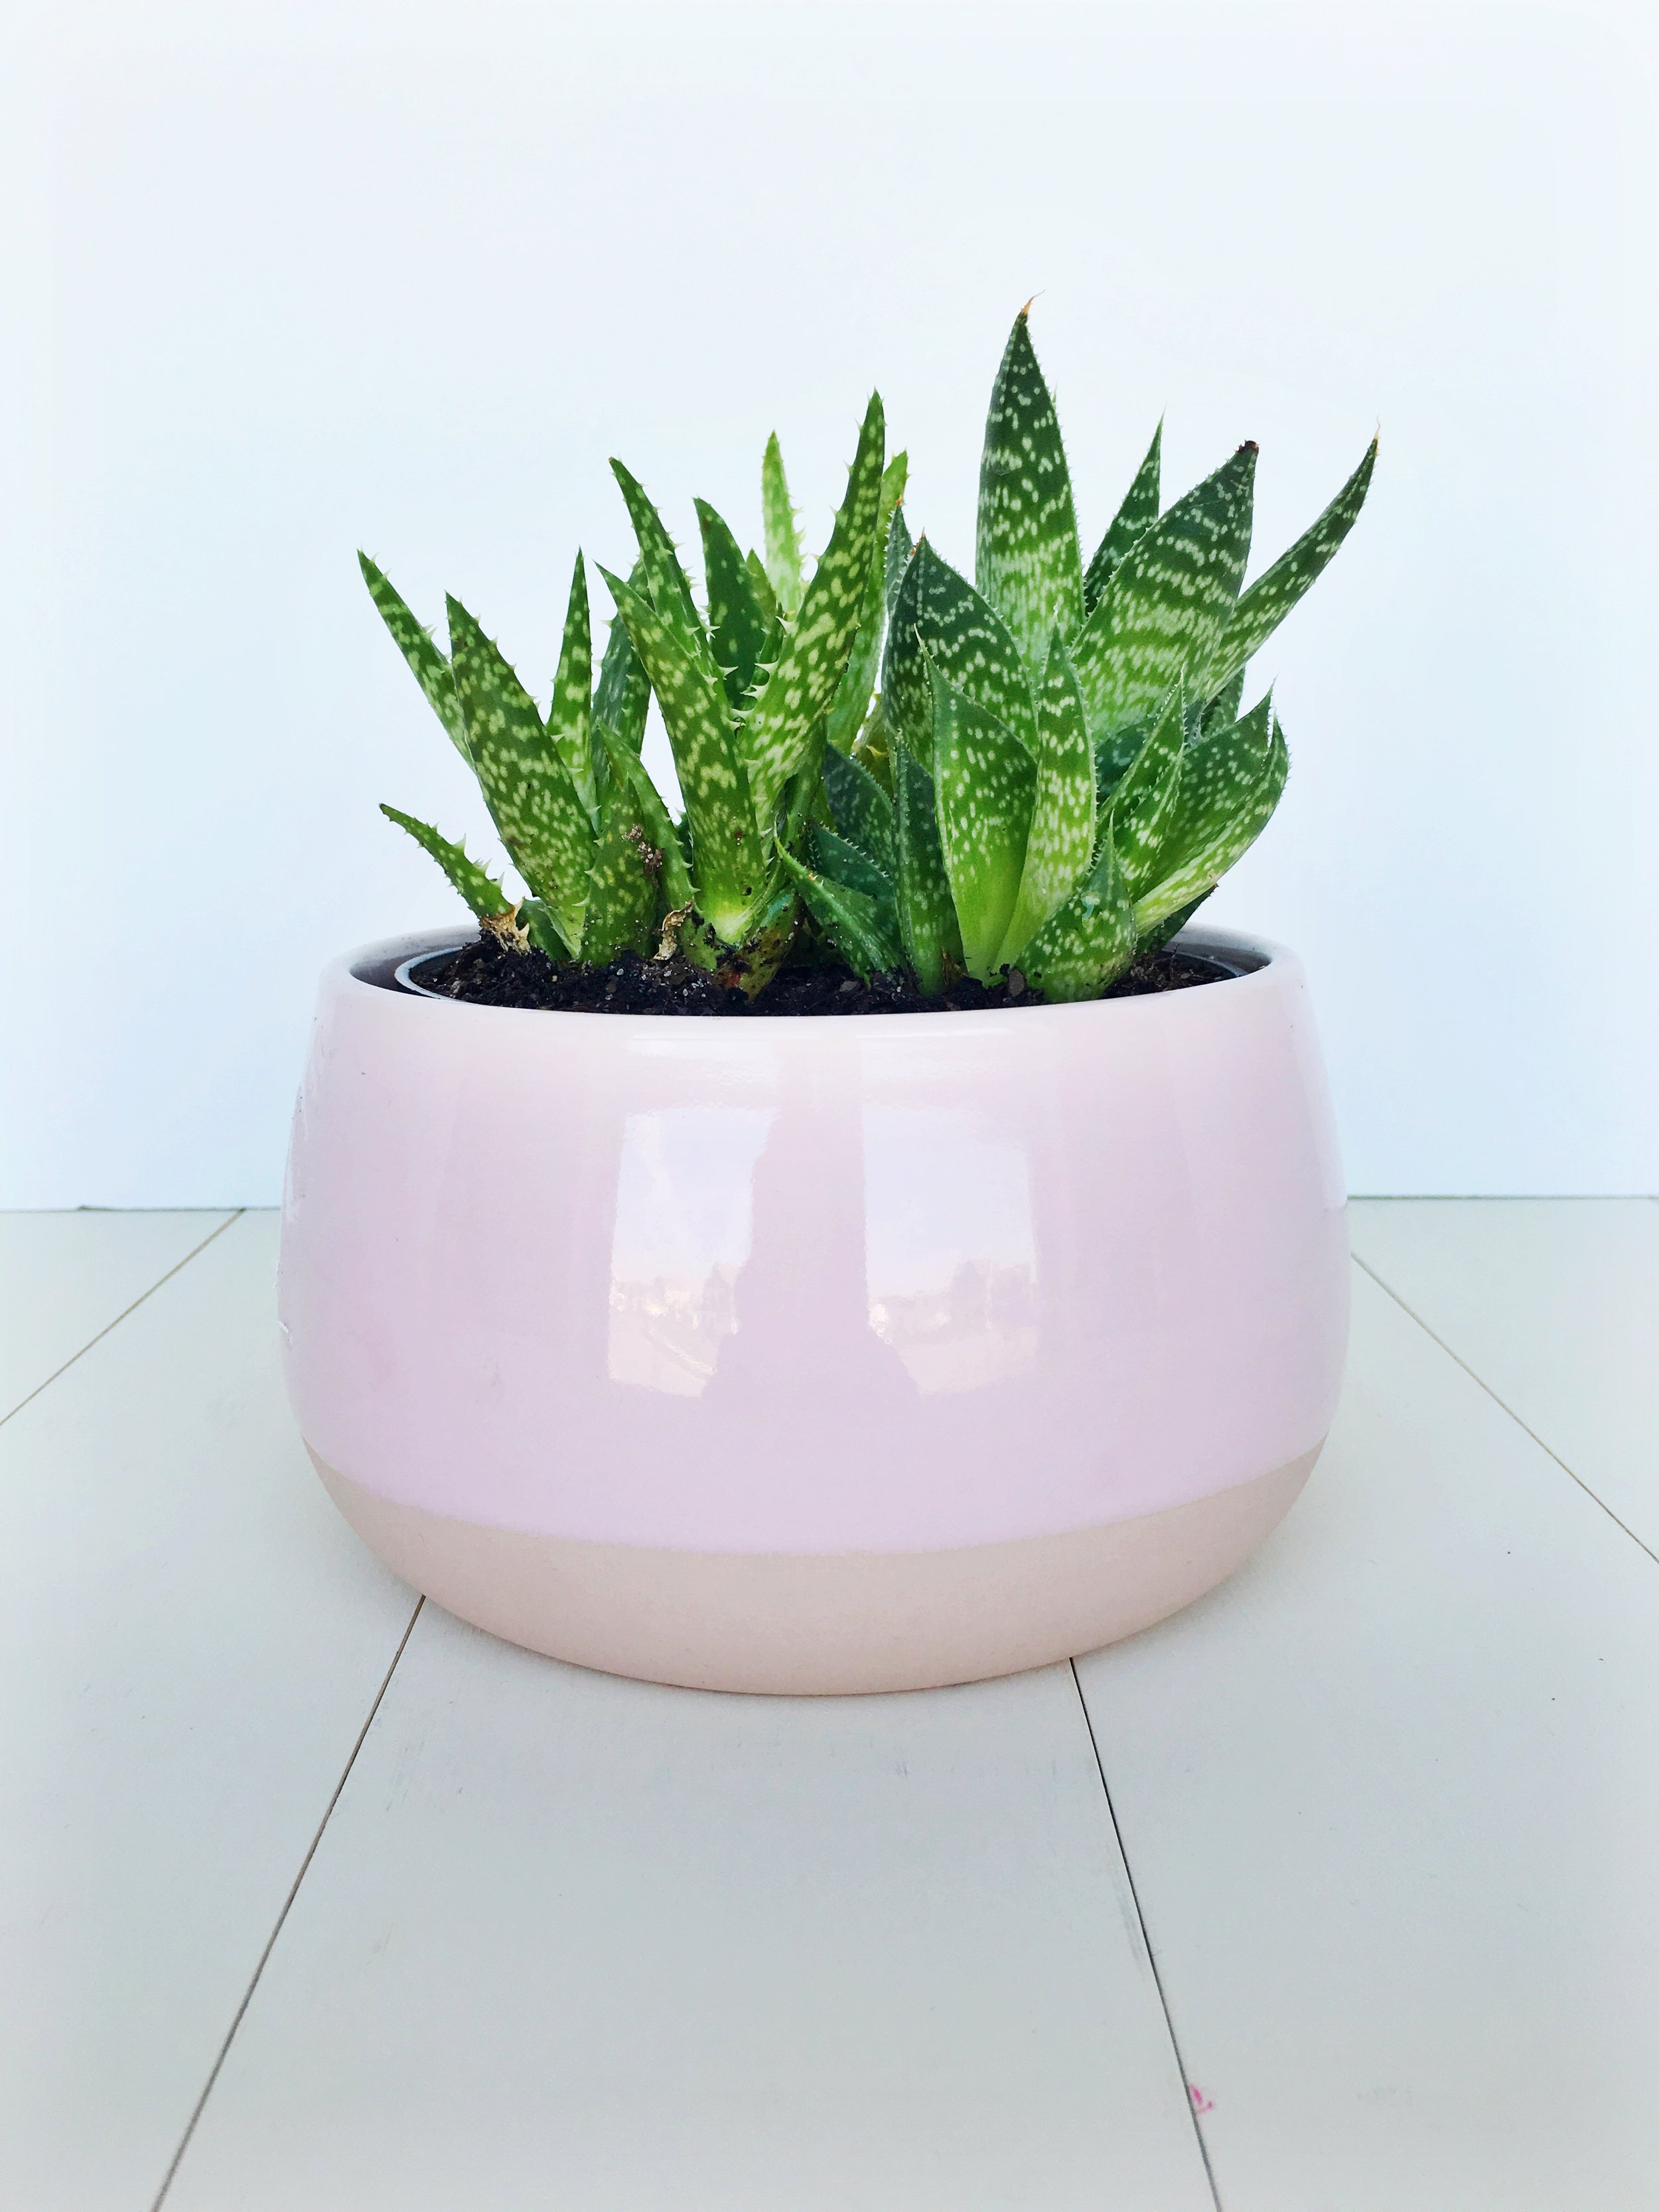 Pretty little plant from Ikea with a pink pot